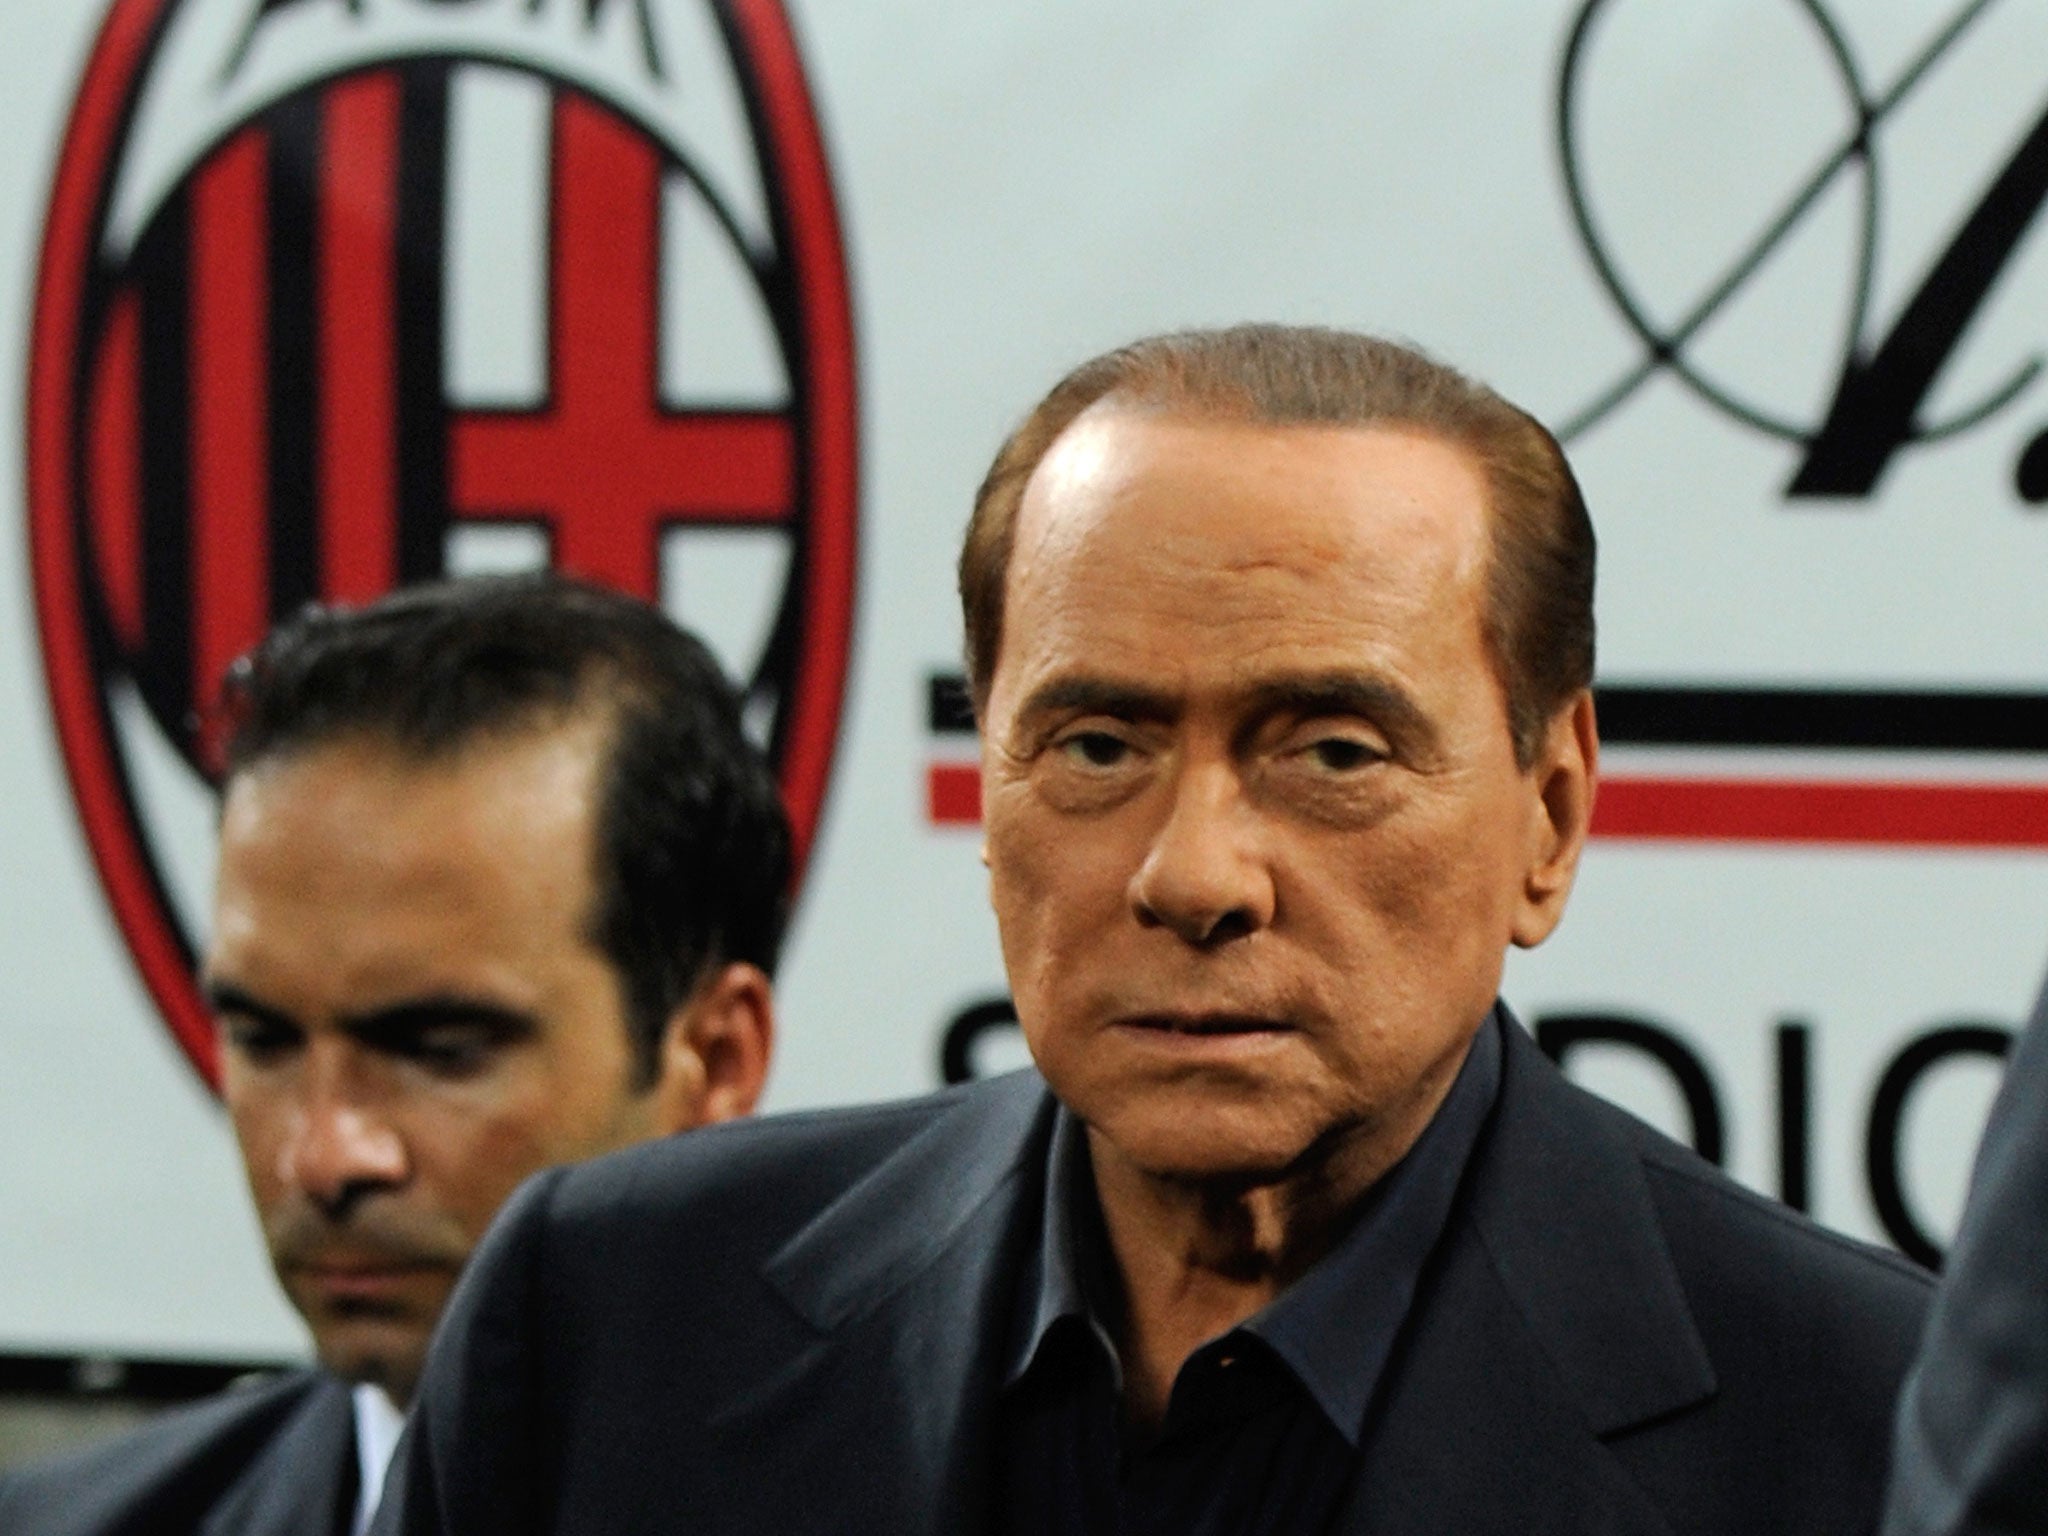 Part of Berlusconi's plan will not have been to see AC Milan drop out of Europe altogether